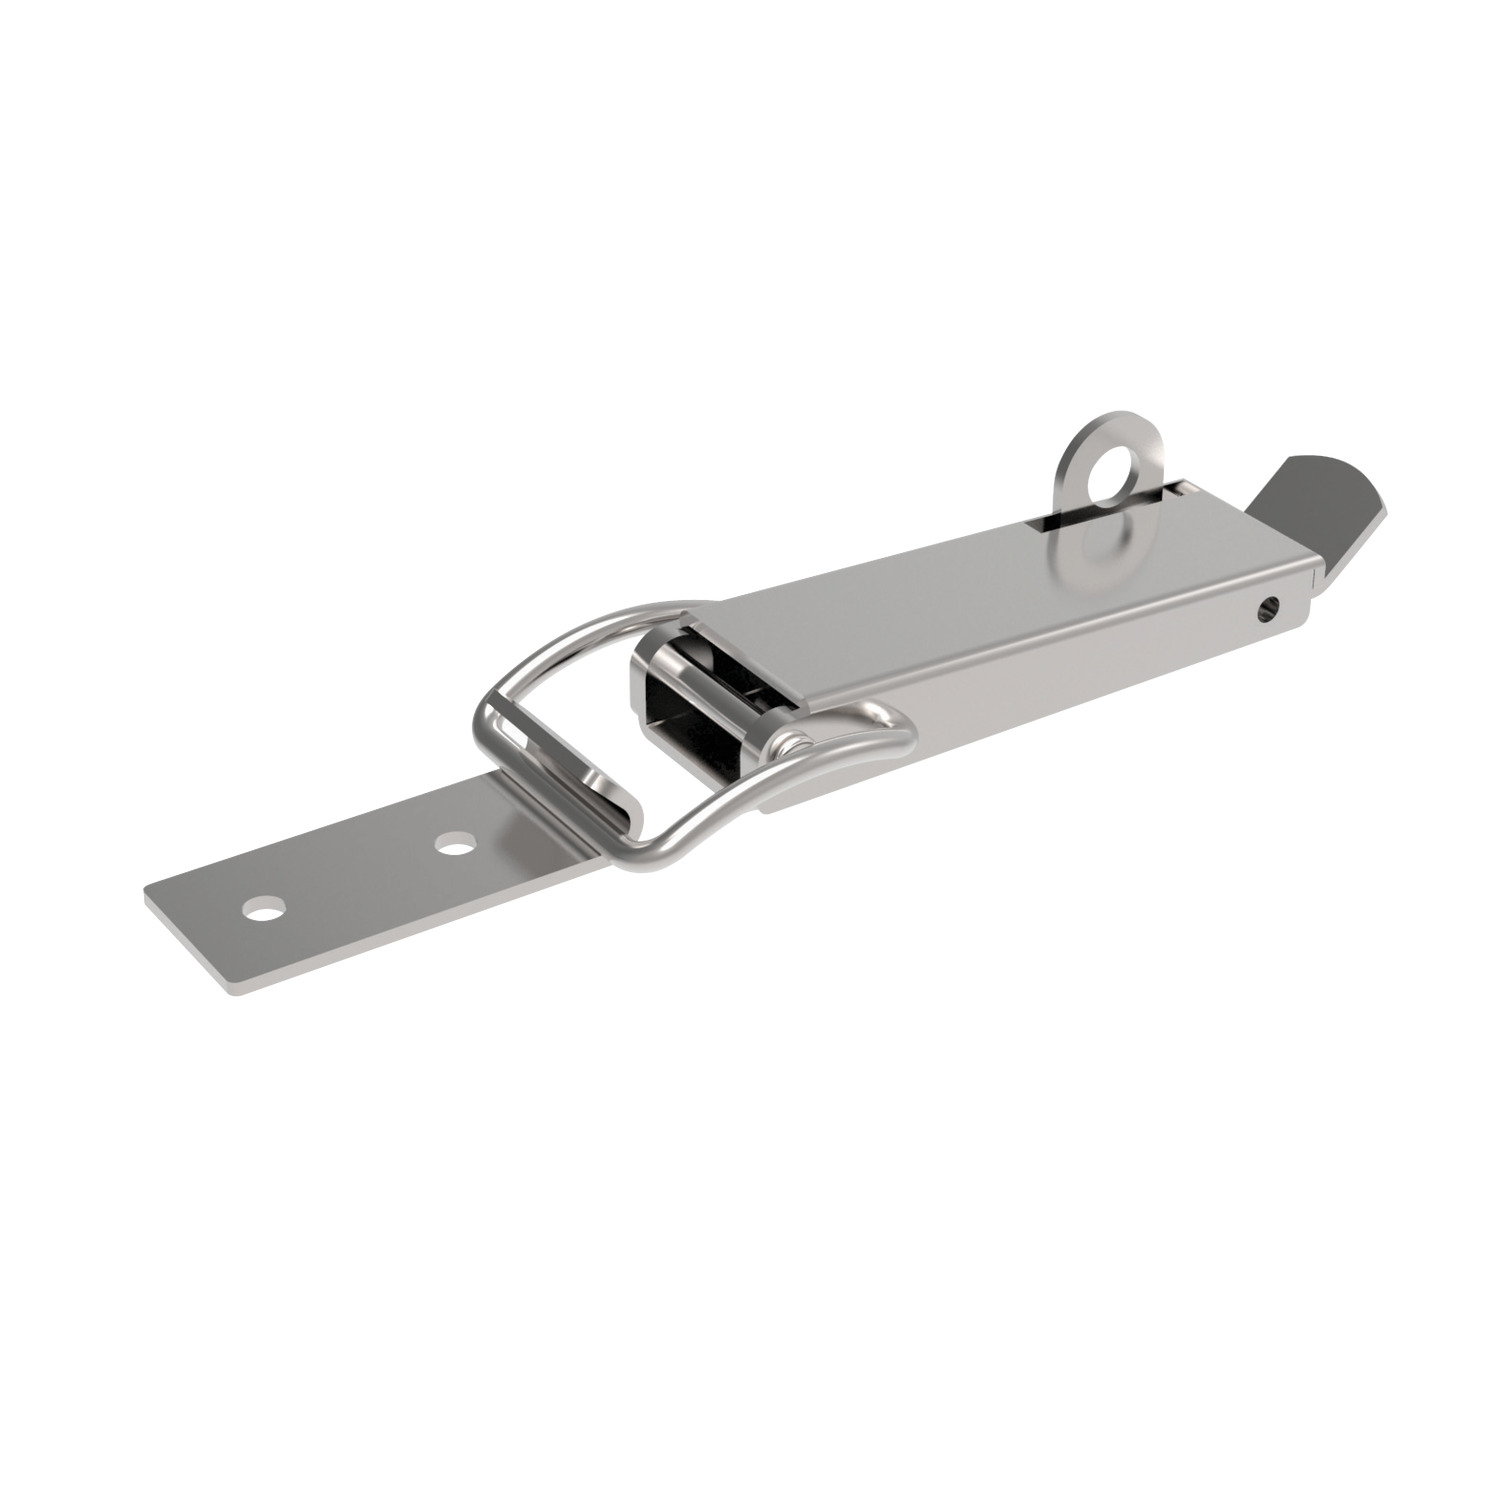 J0430.AC0004 Toggle Latches Zinc Plated Steel - 140,5 - 12,5 - 34